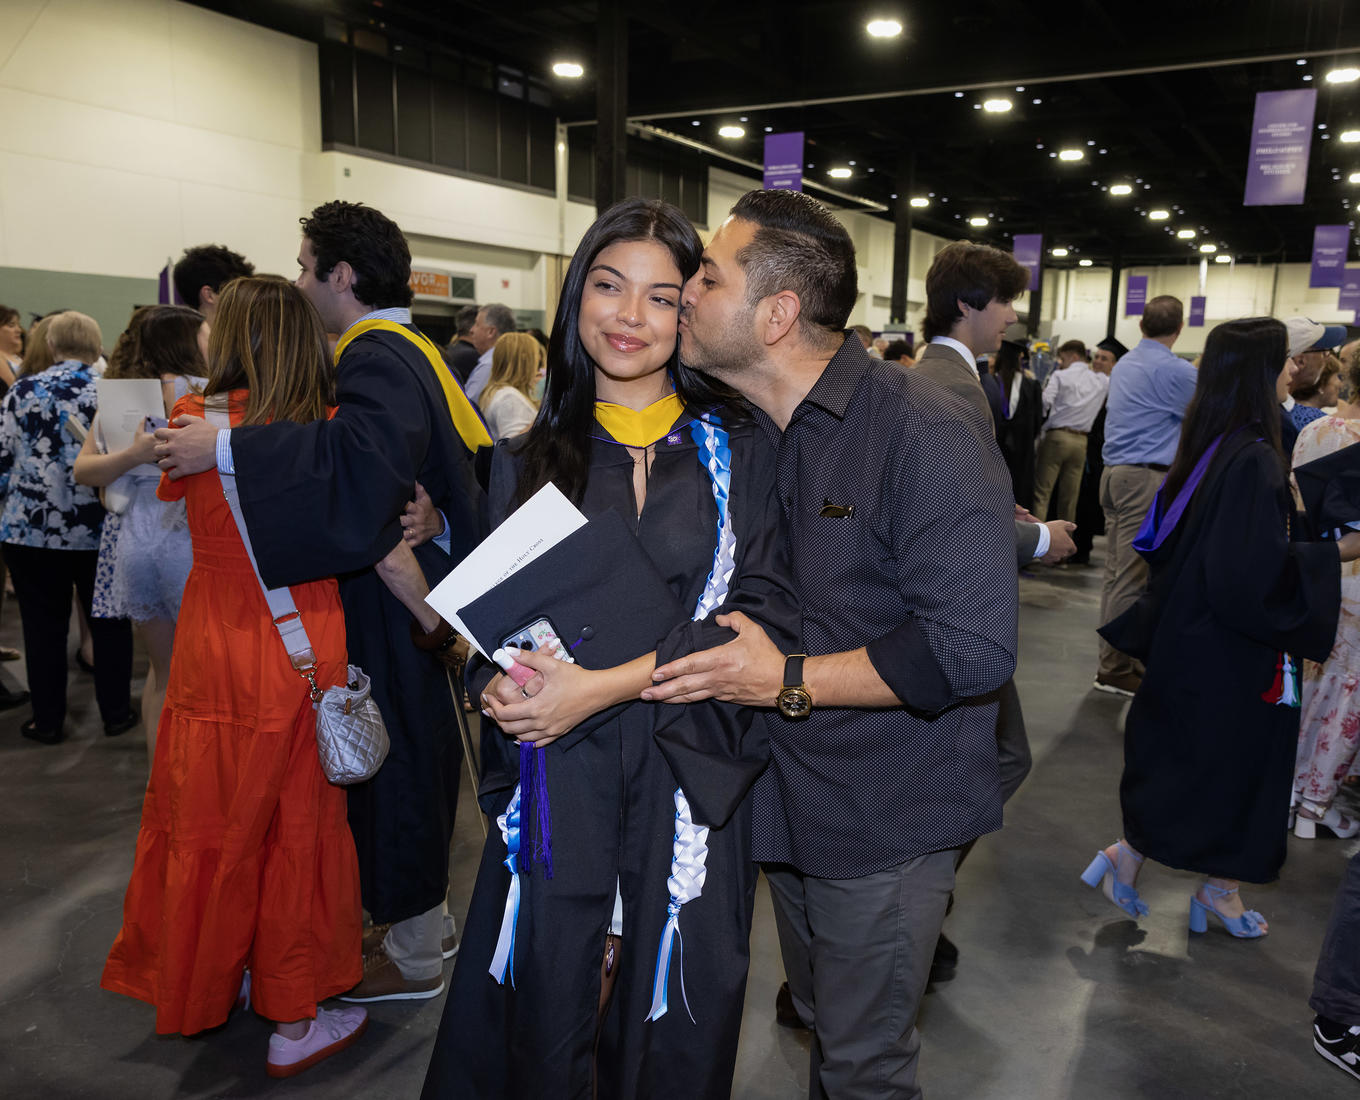 A dad kisses his daughter on the cheek after her graduation